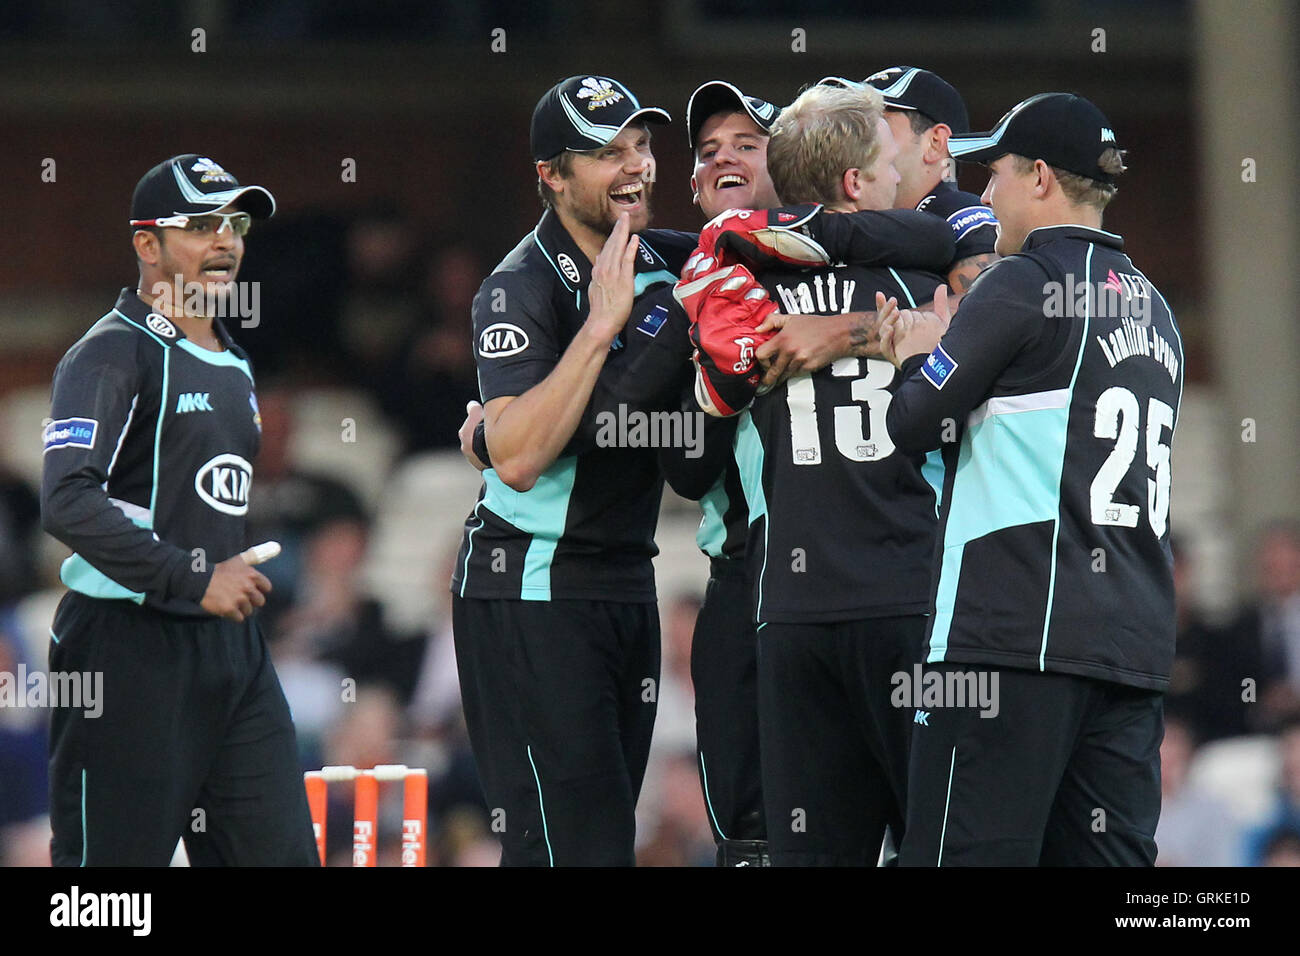 Surrey players celebrate the wicket of Owais Shah - Surrey Lions vs Essex Eagles - Friends Life T20 South Division Cricket at the Kia Oval,London - 13/06/12. Stock Photo